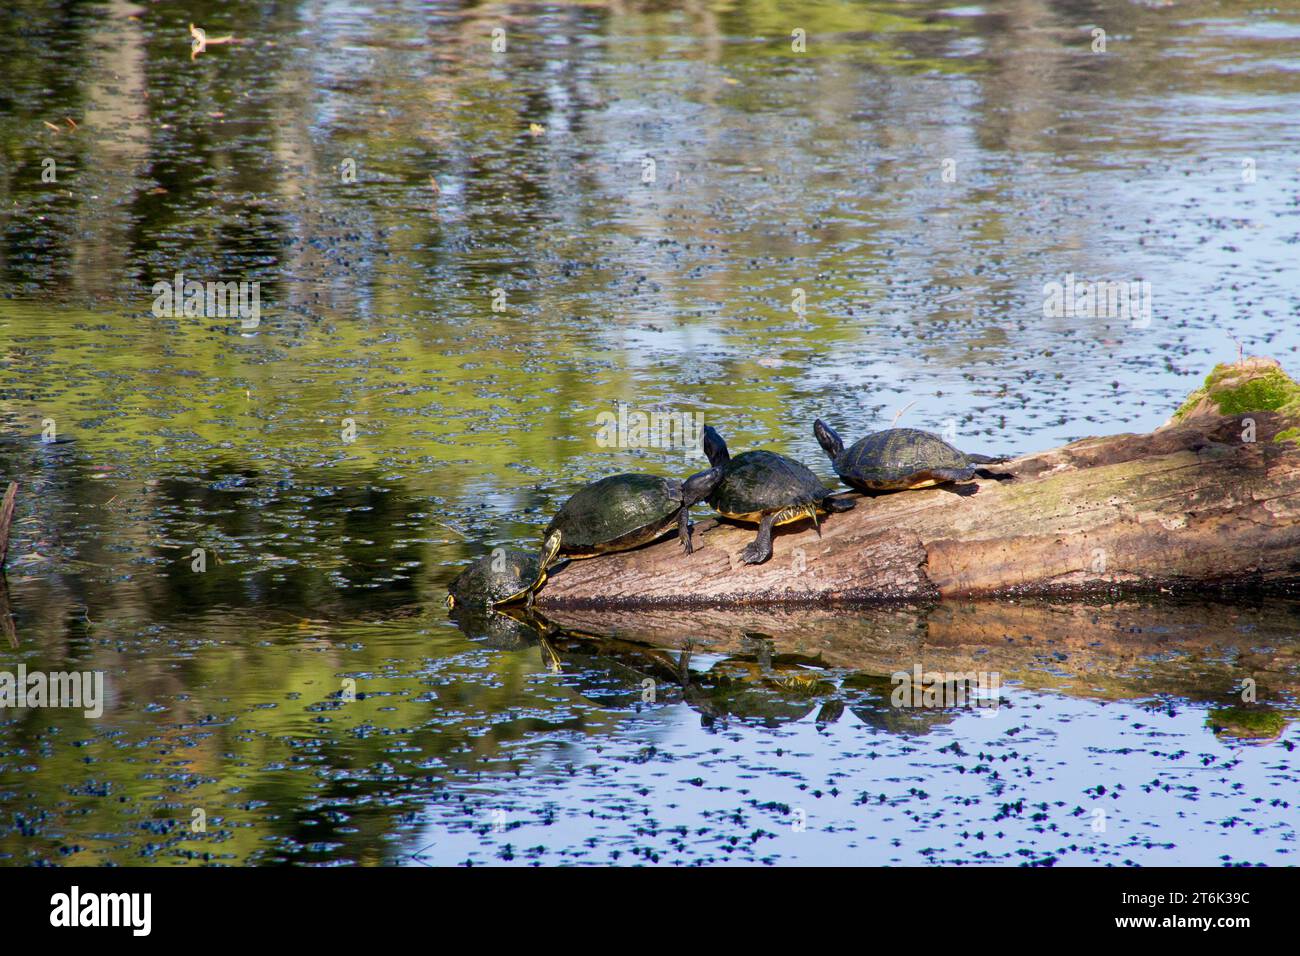 Four turtles, three resting on a rocky outcrop into a plant infested pond and the fourth one climbing our of the water. Stock Photo